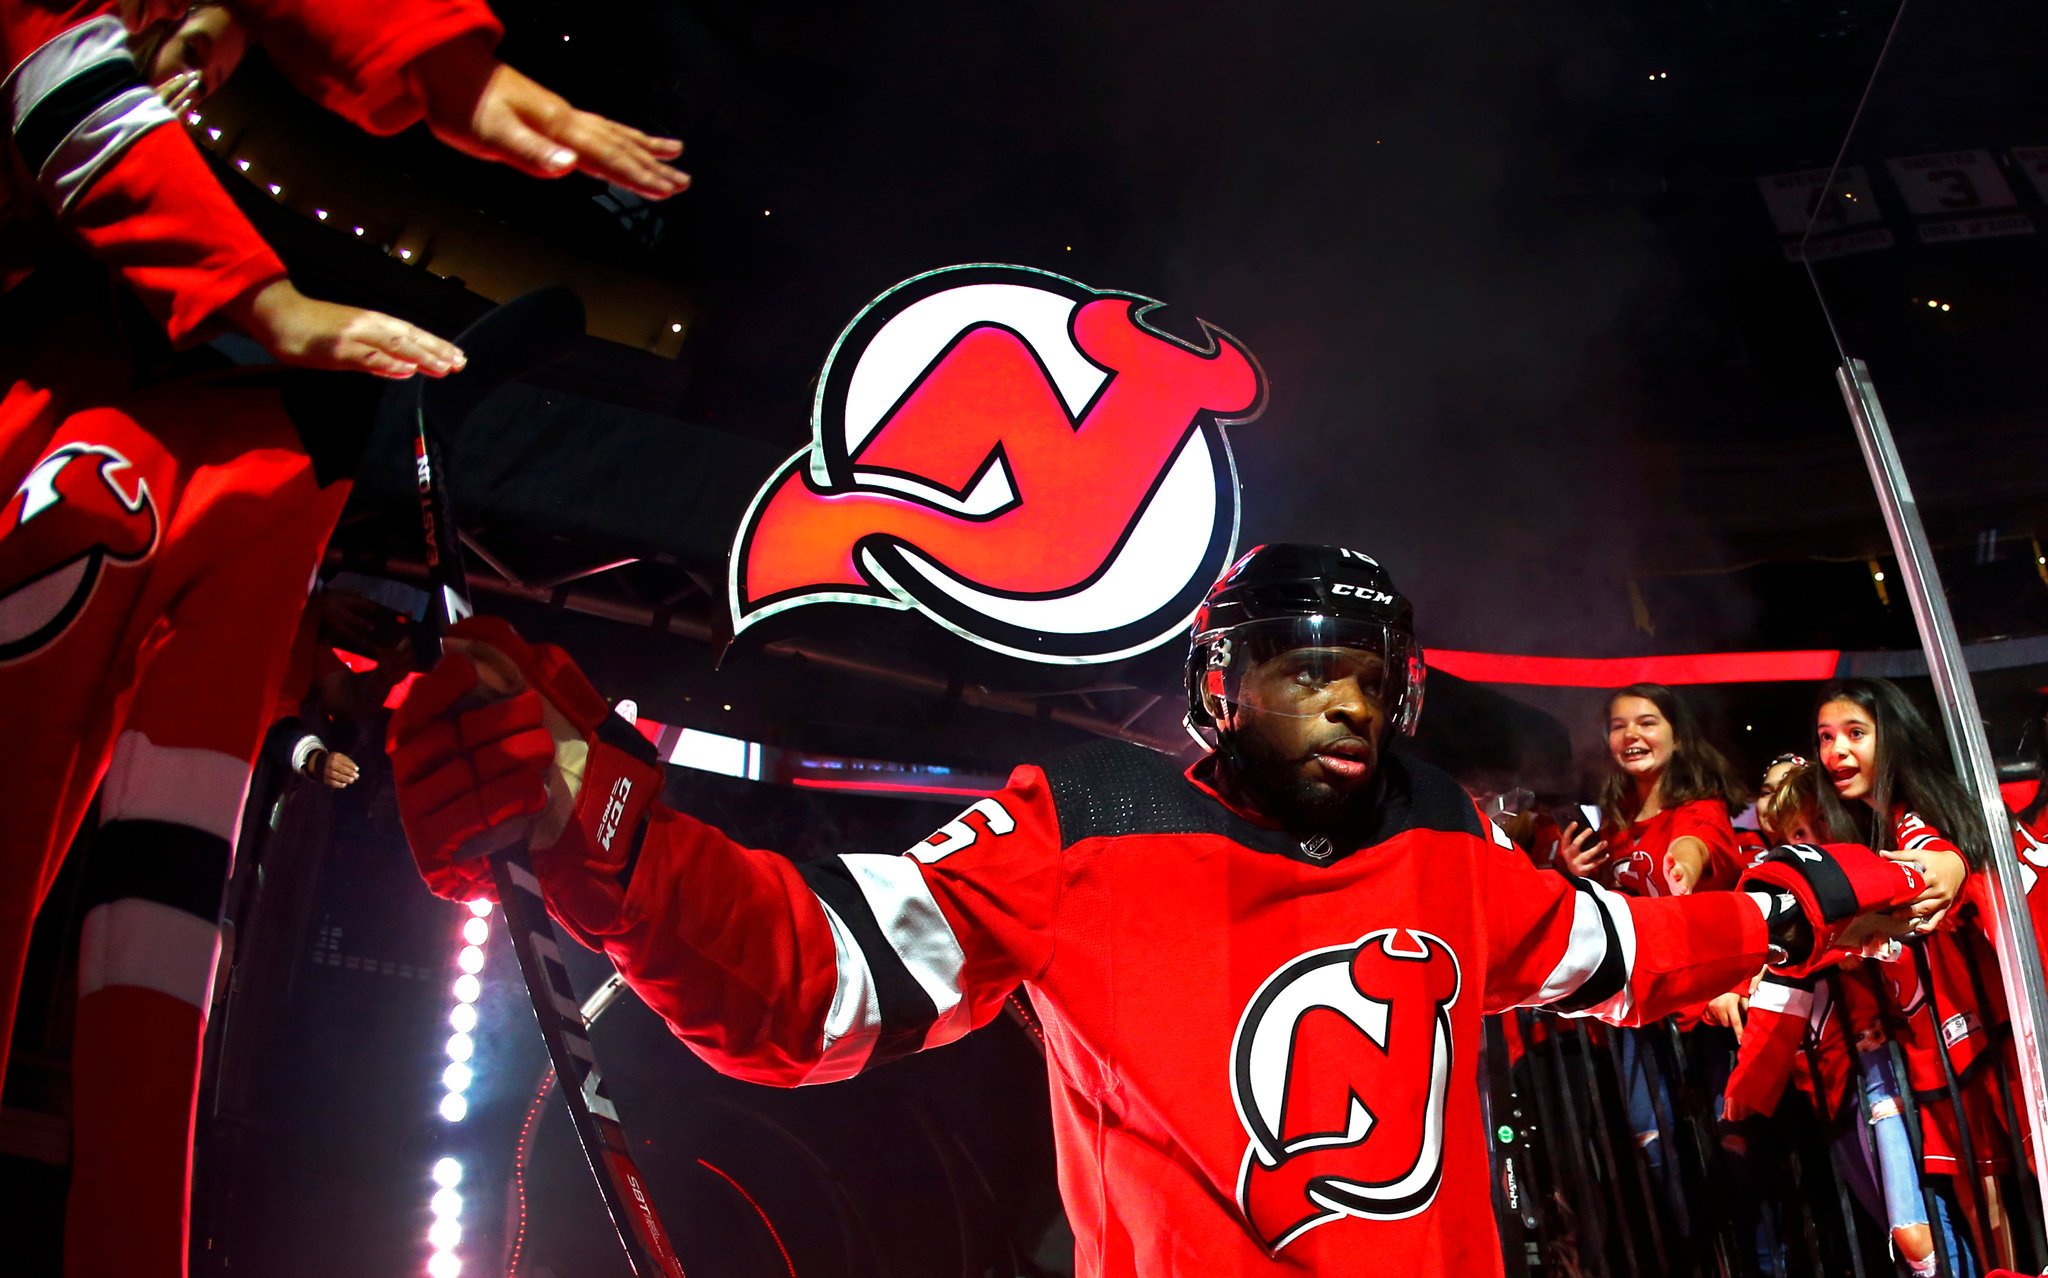 With P.K. Subban, Devils Seek Wins on the Ice and in the Ticket Office